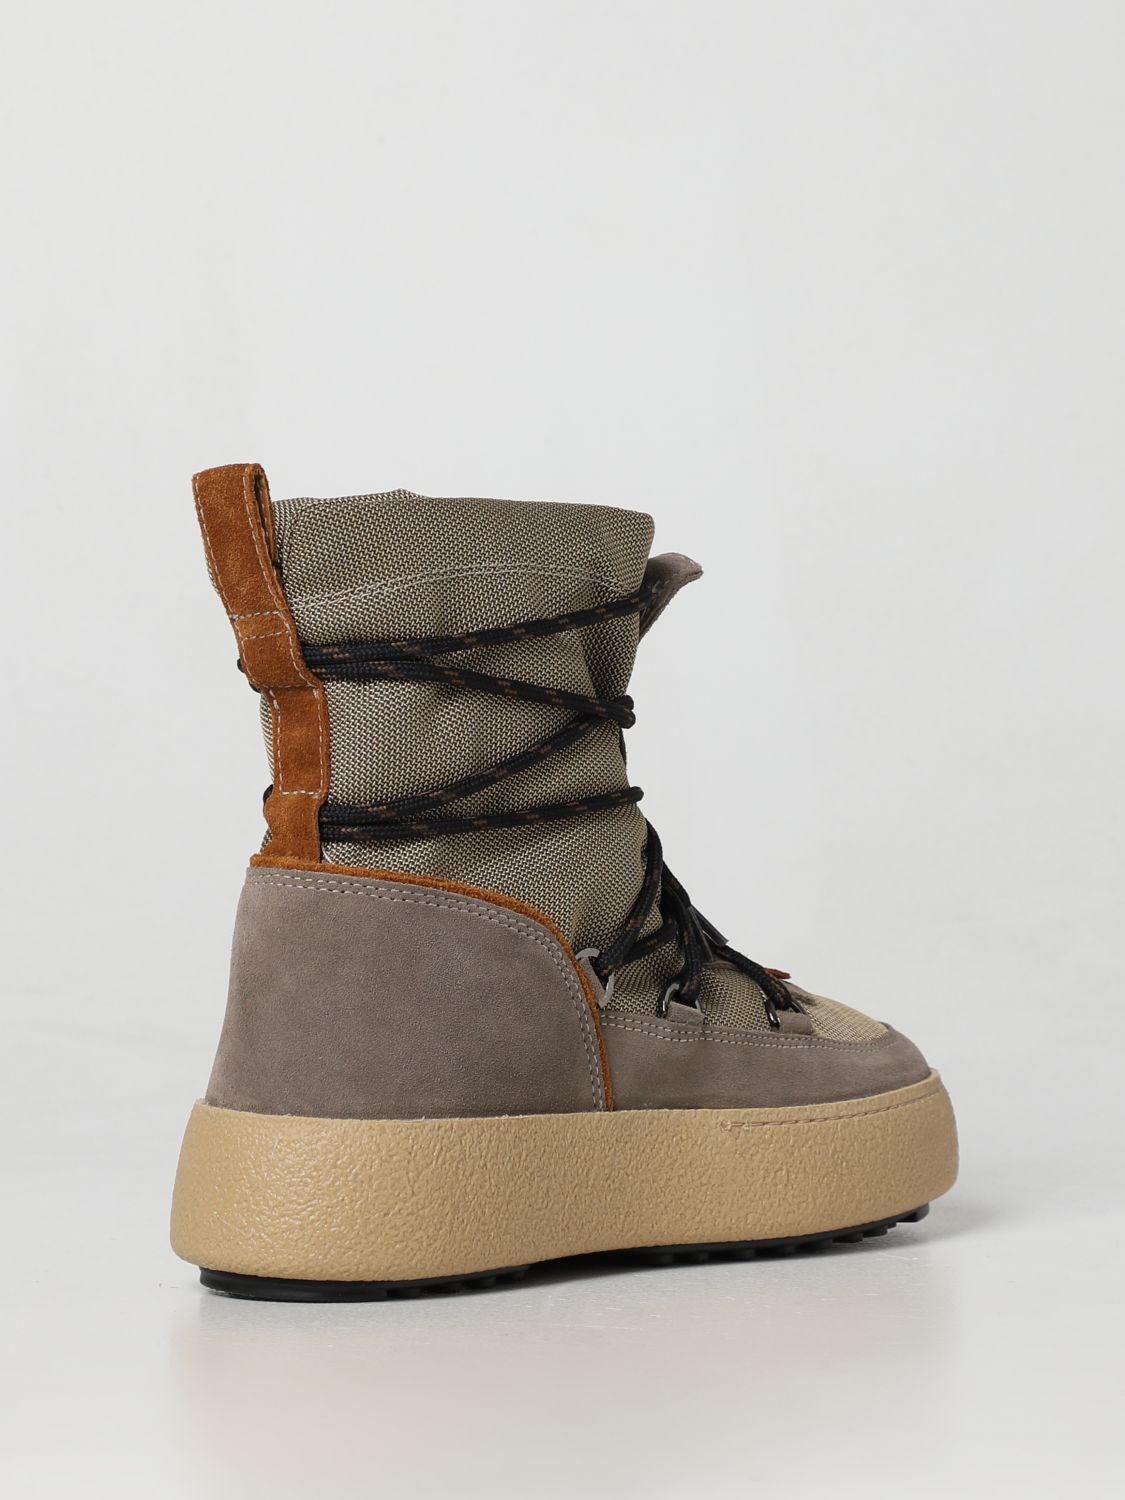 sewing machine journalist Calm MOON BOOT: boots for man - Beige | Moon Boot boots 24400300 online on  GIGLIO.COM